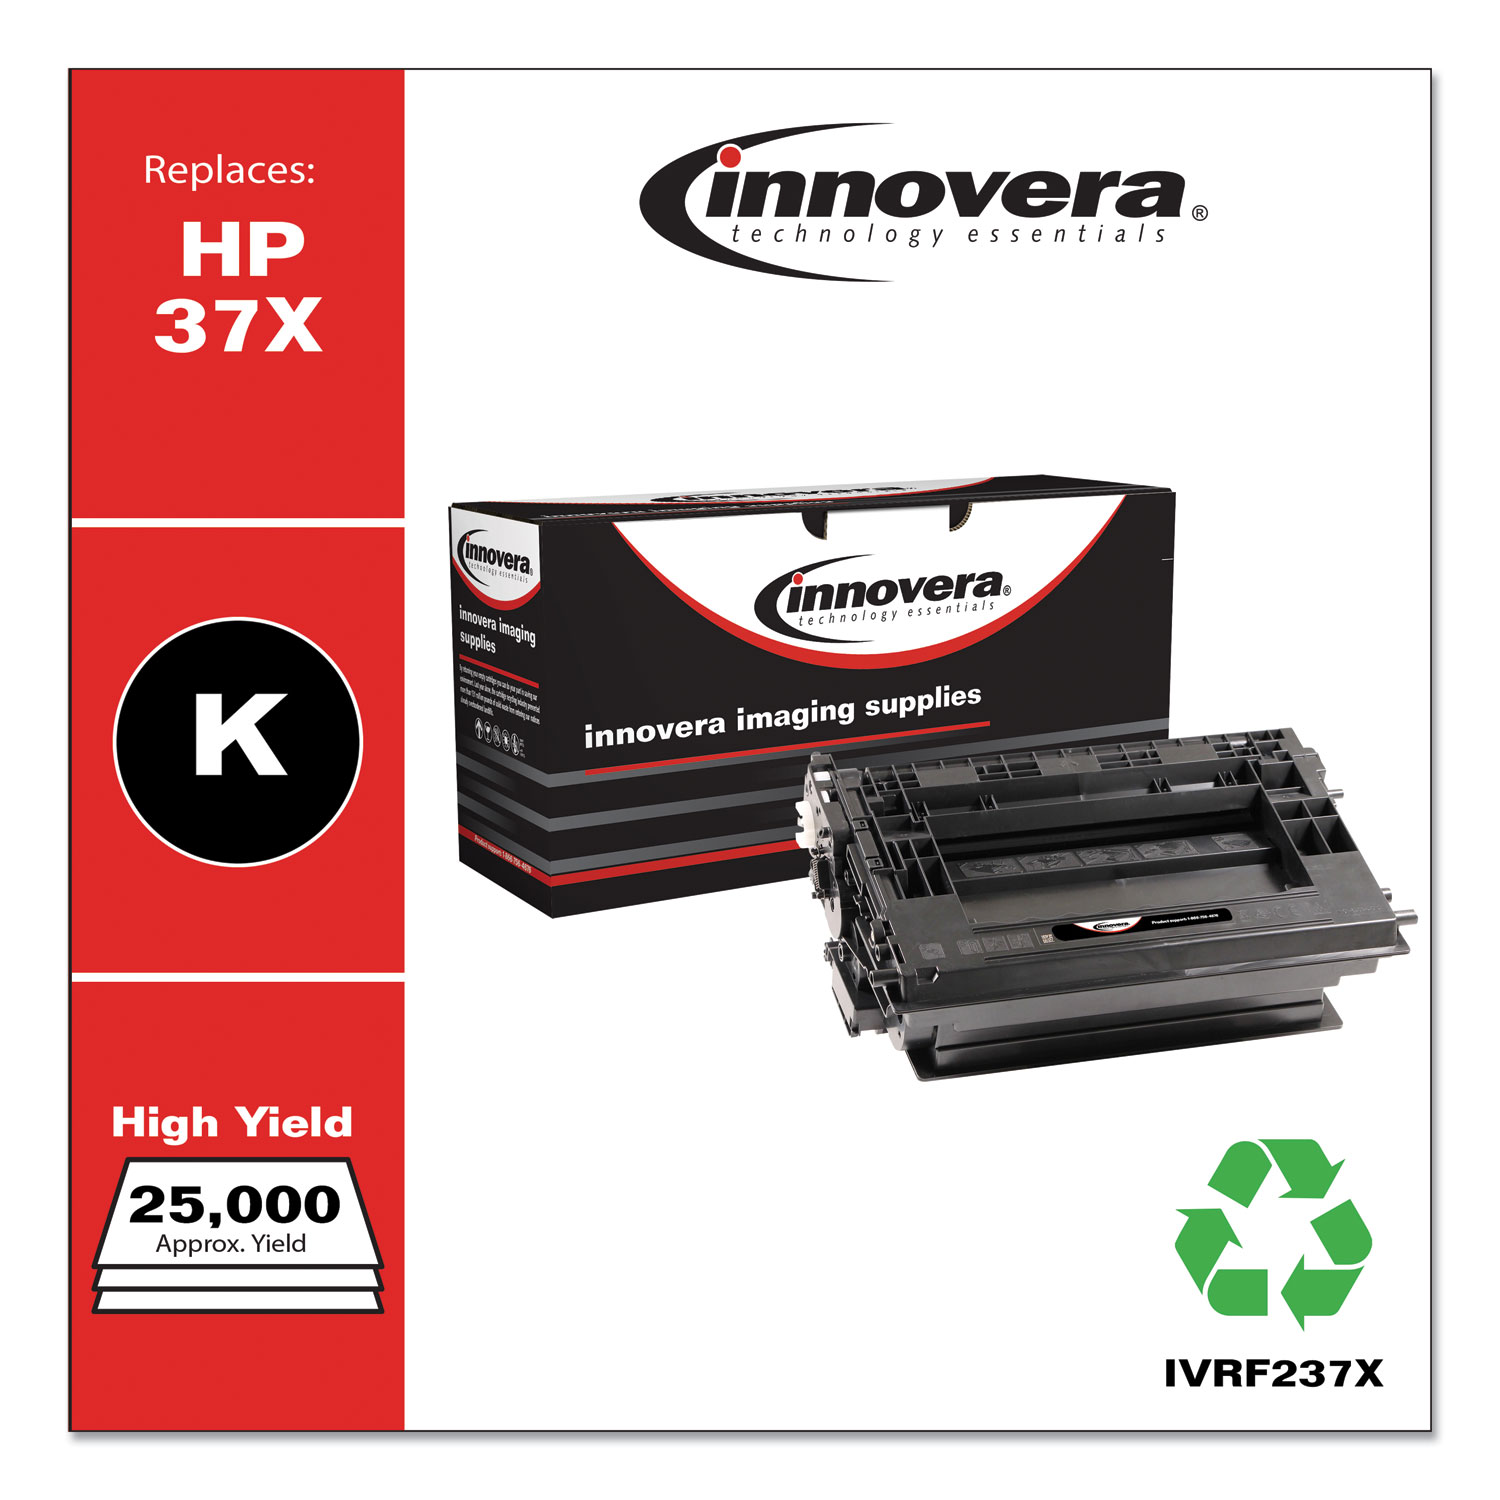  Innovera IVRF237X Remanufactured Black High-Yield Toner, Replacement for HP 37X (CF237X), 25,000 Page-Yield (IVRF237X) 